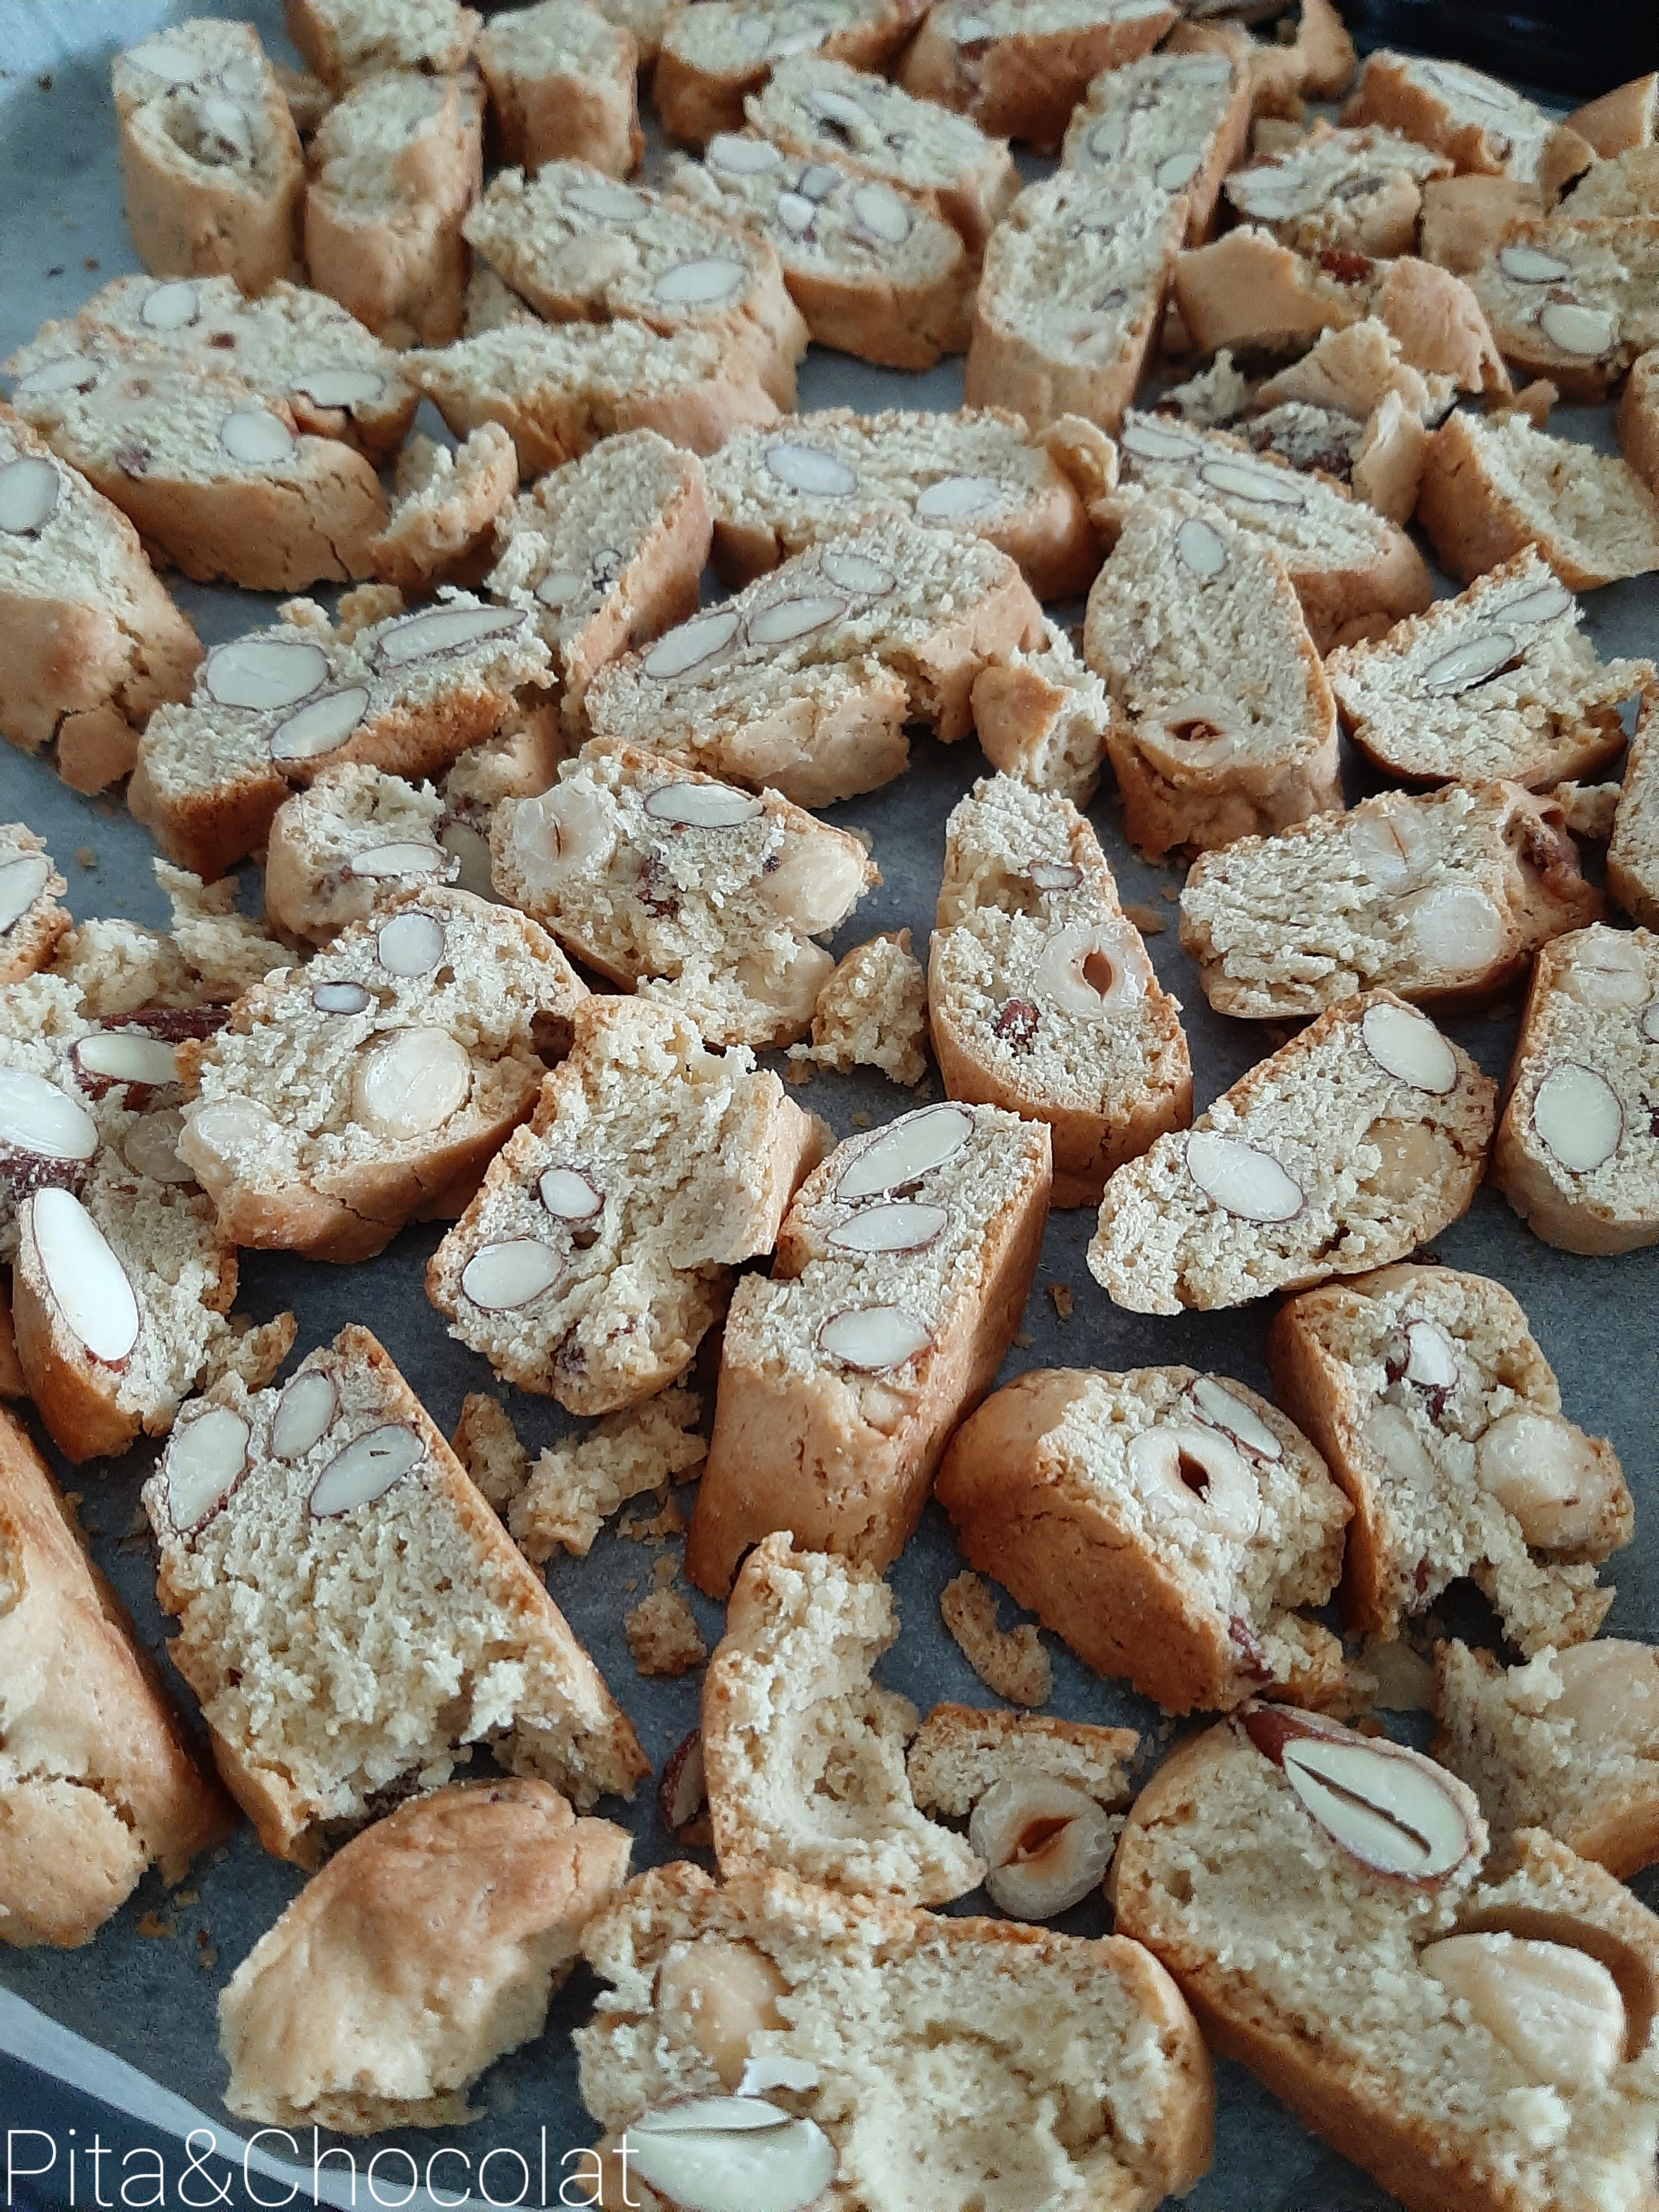 Cantucci - petits biscuits aux amandes